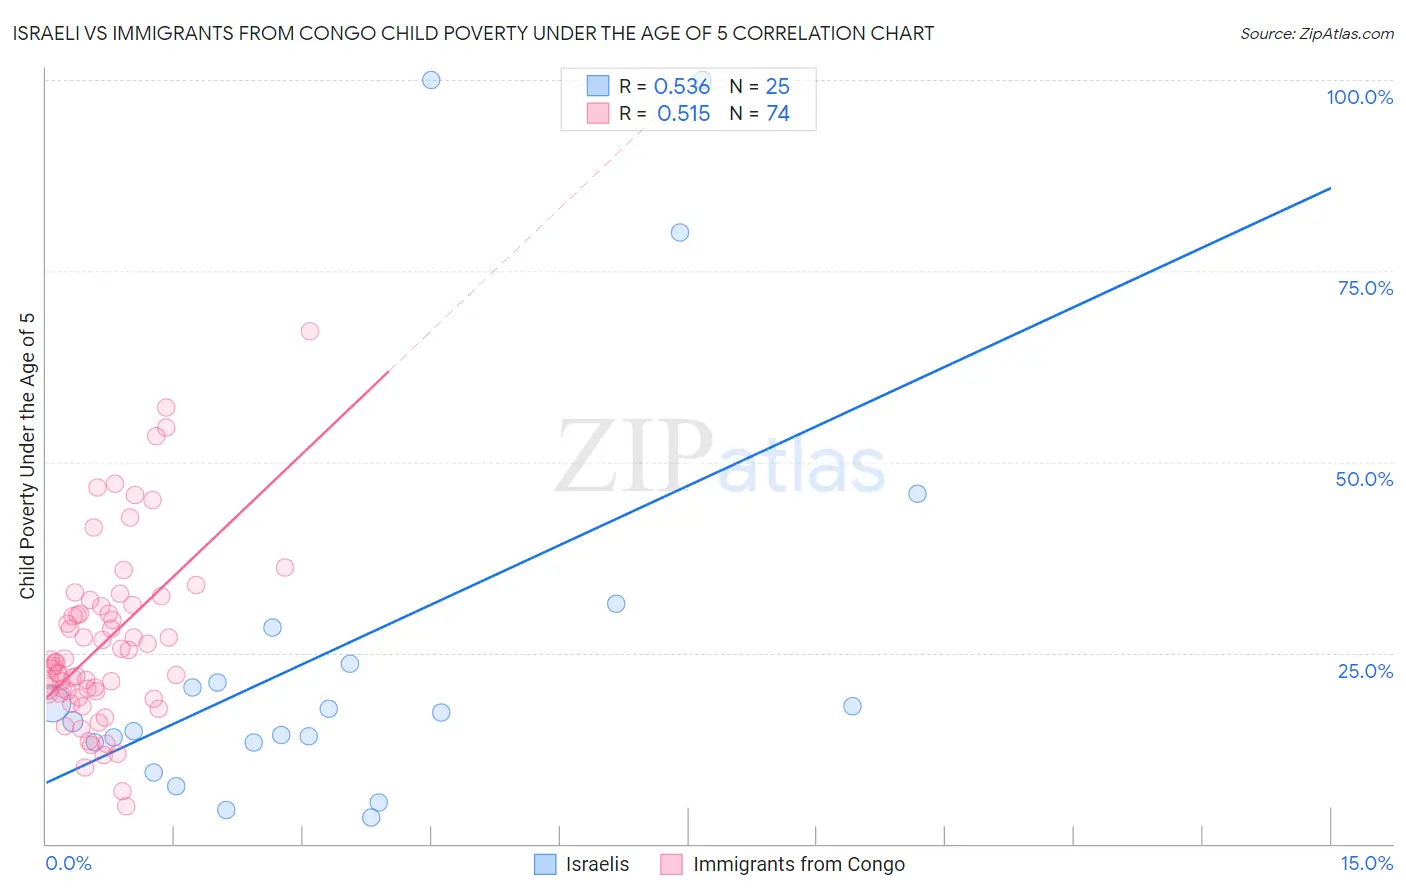 Israeli vs Immigrants from Congo Child Poverty Under the Age of 5